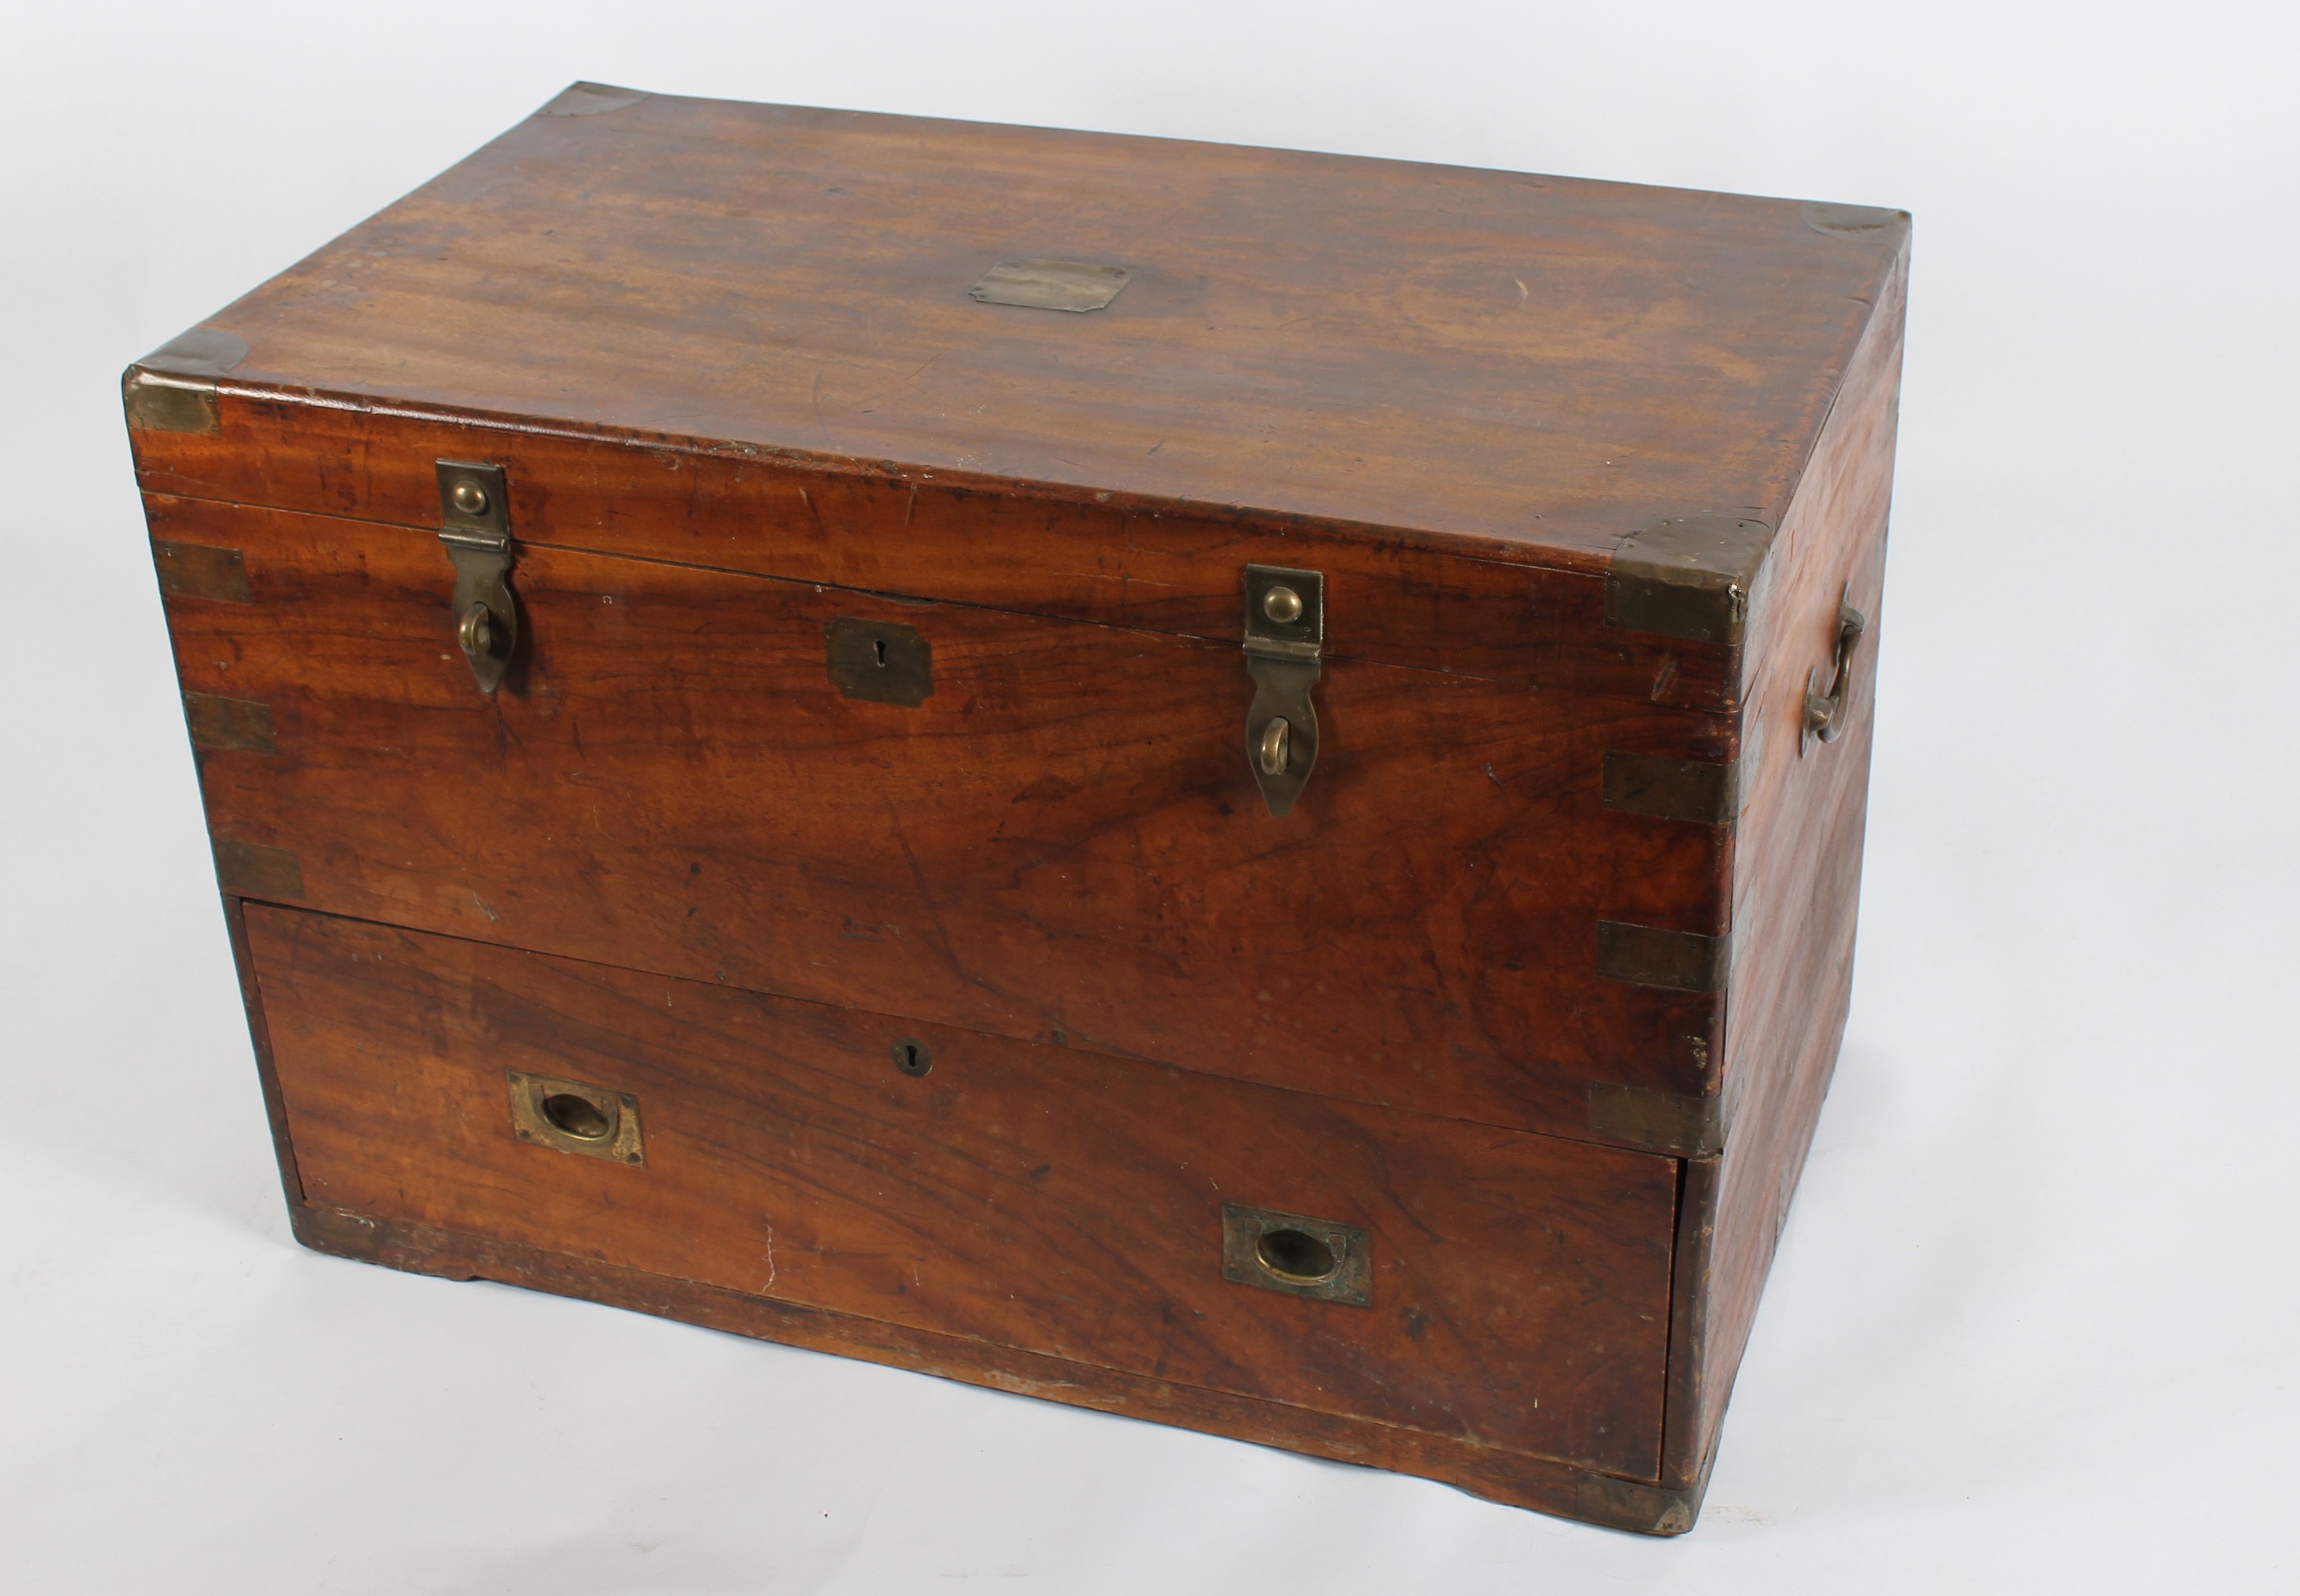 A Camphor wood chest, of campaign type, with brass bands to corners, and inset brass handles, with